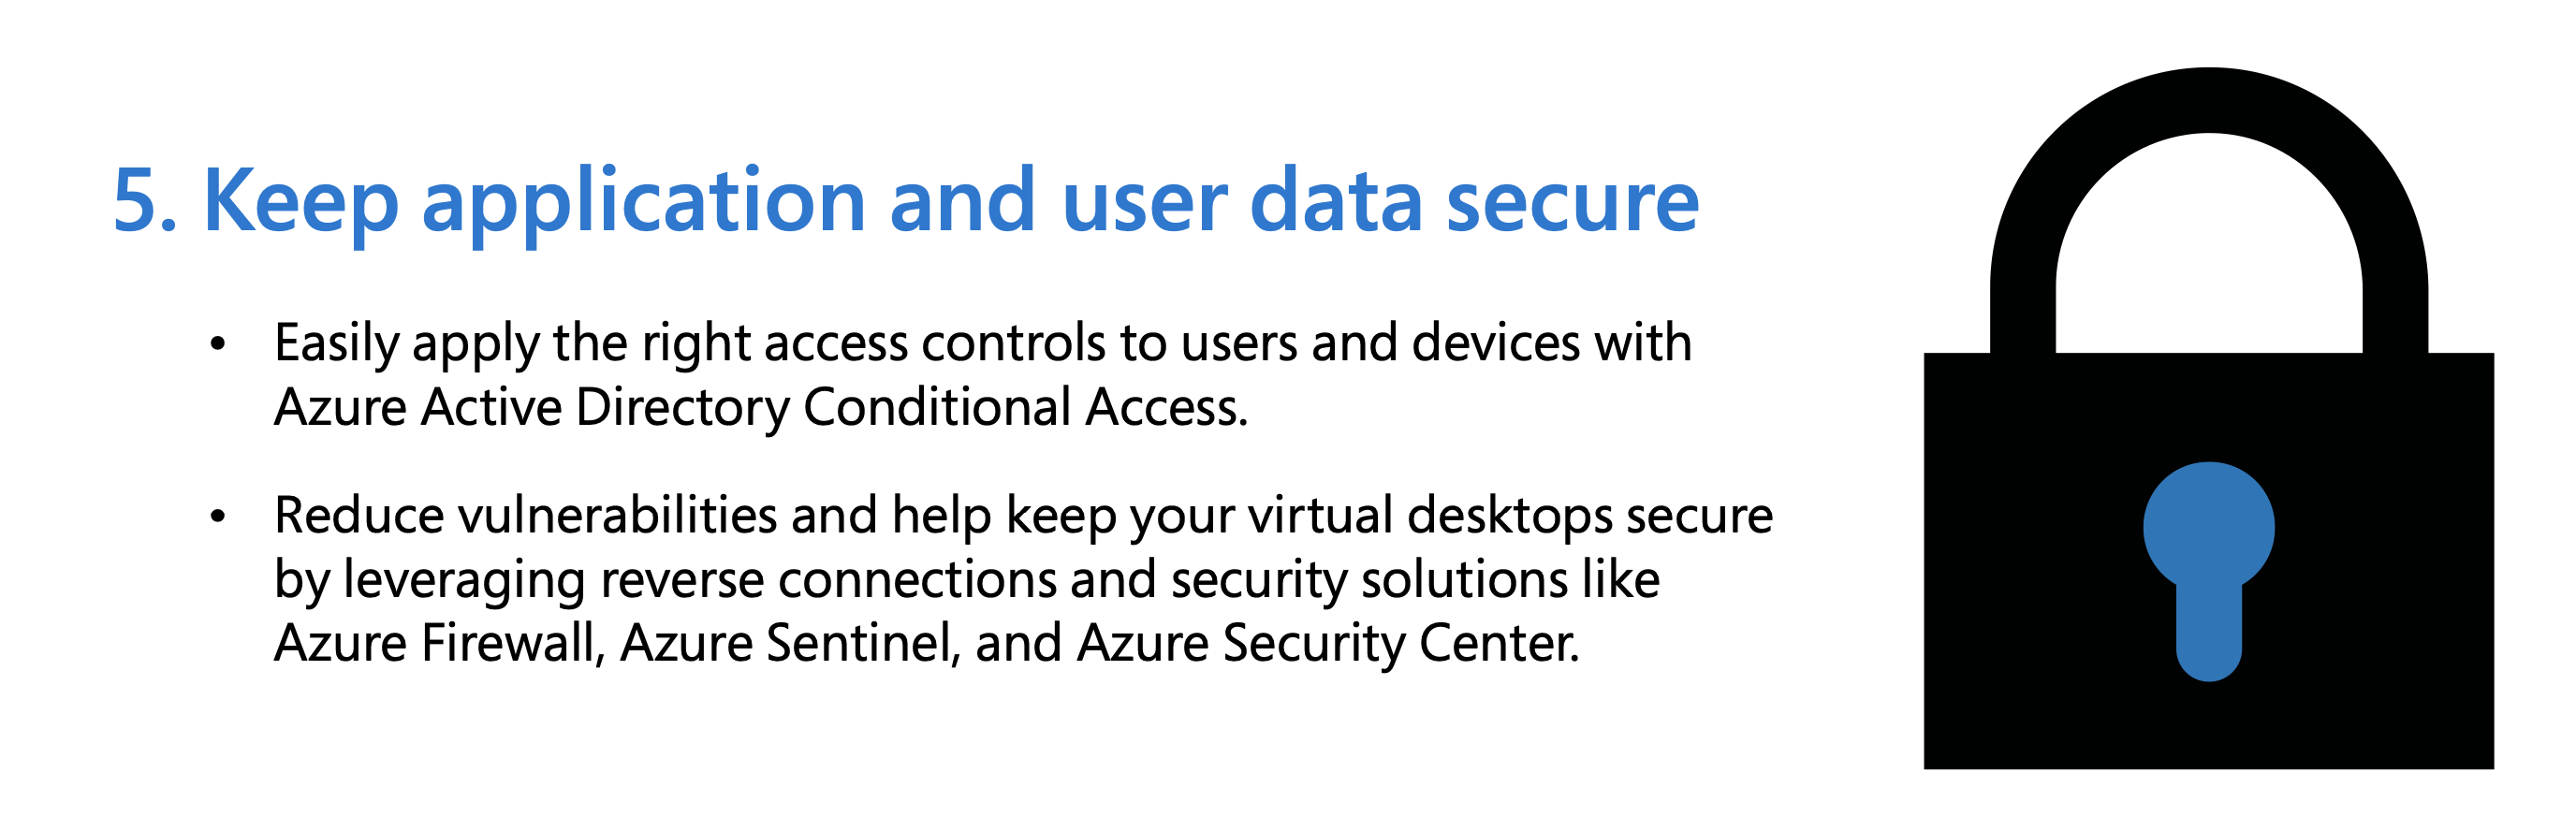 Keep application and user data secure